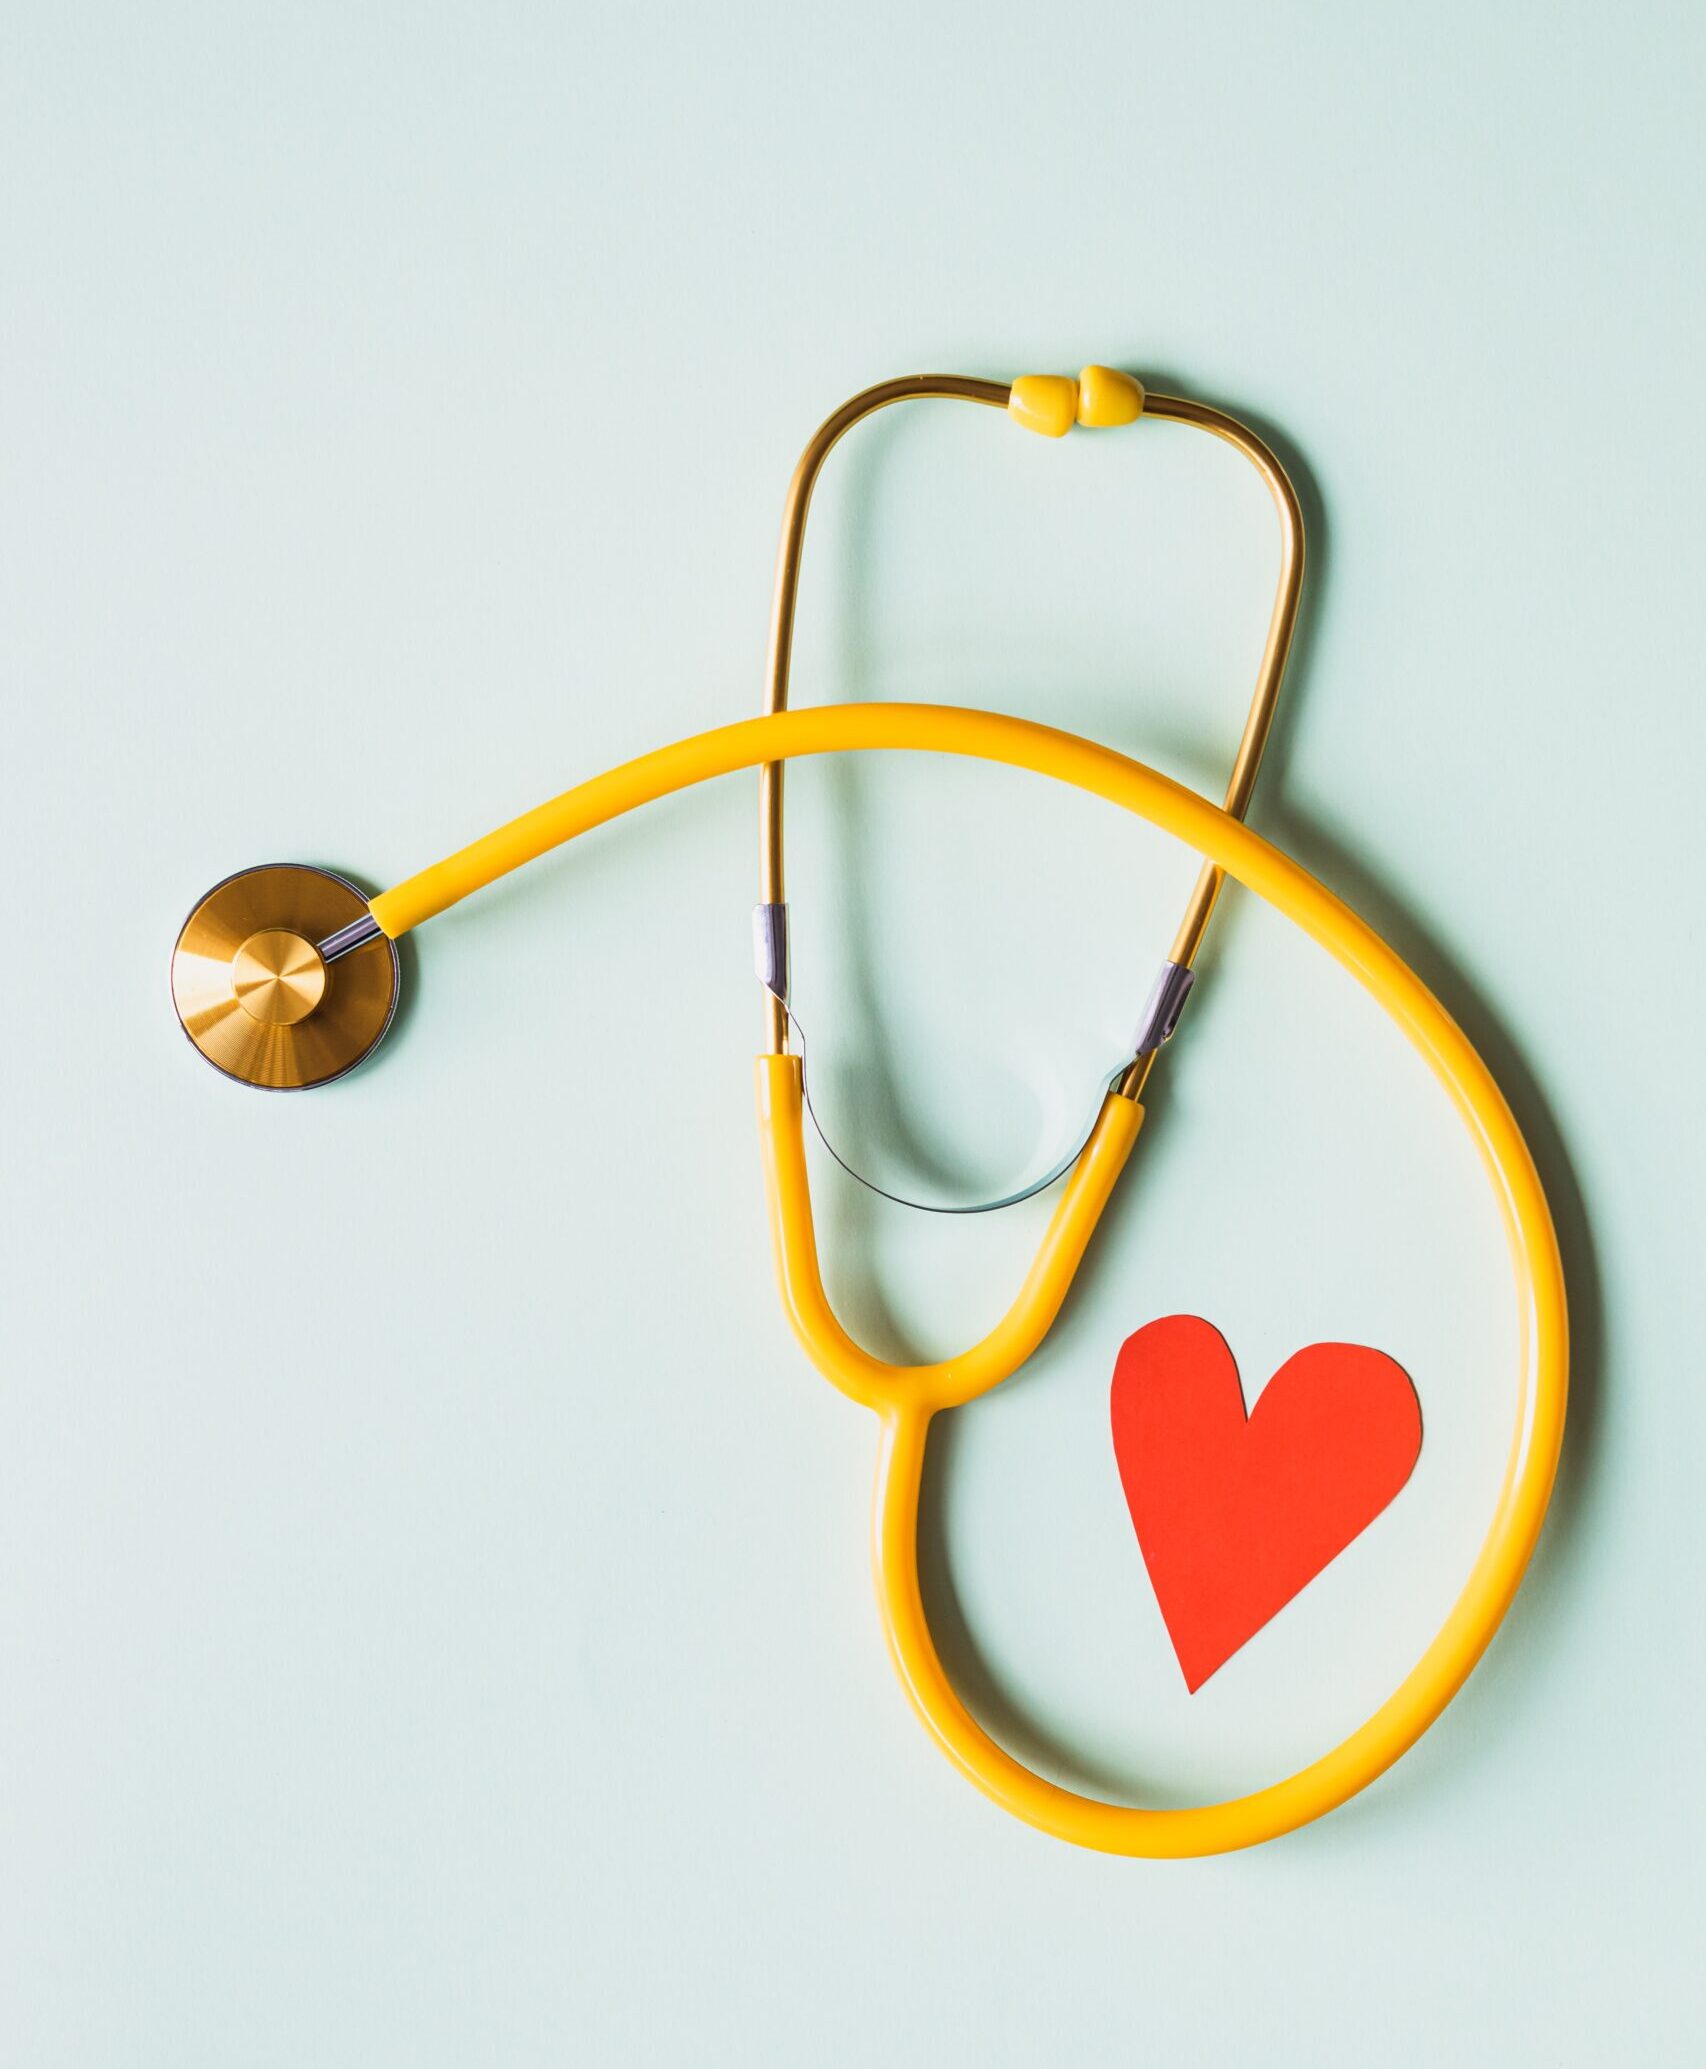 medical-stethoscope-with-red-paper-heart-on-white-surface